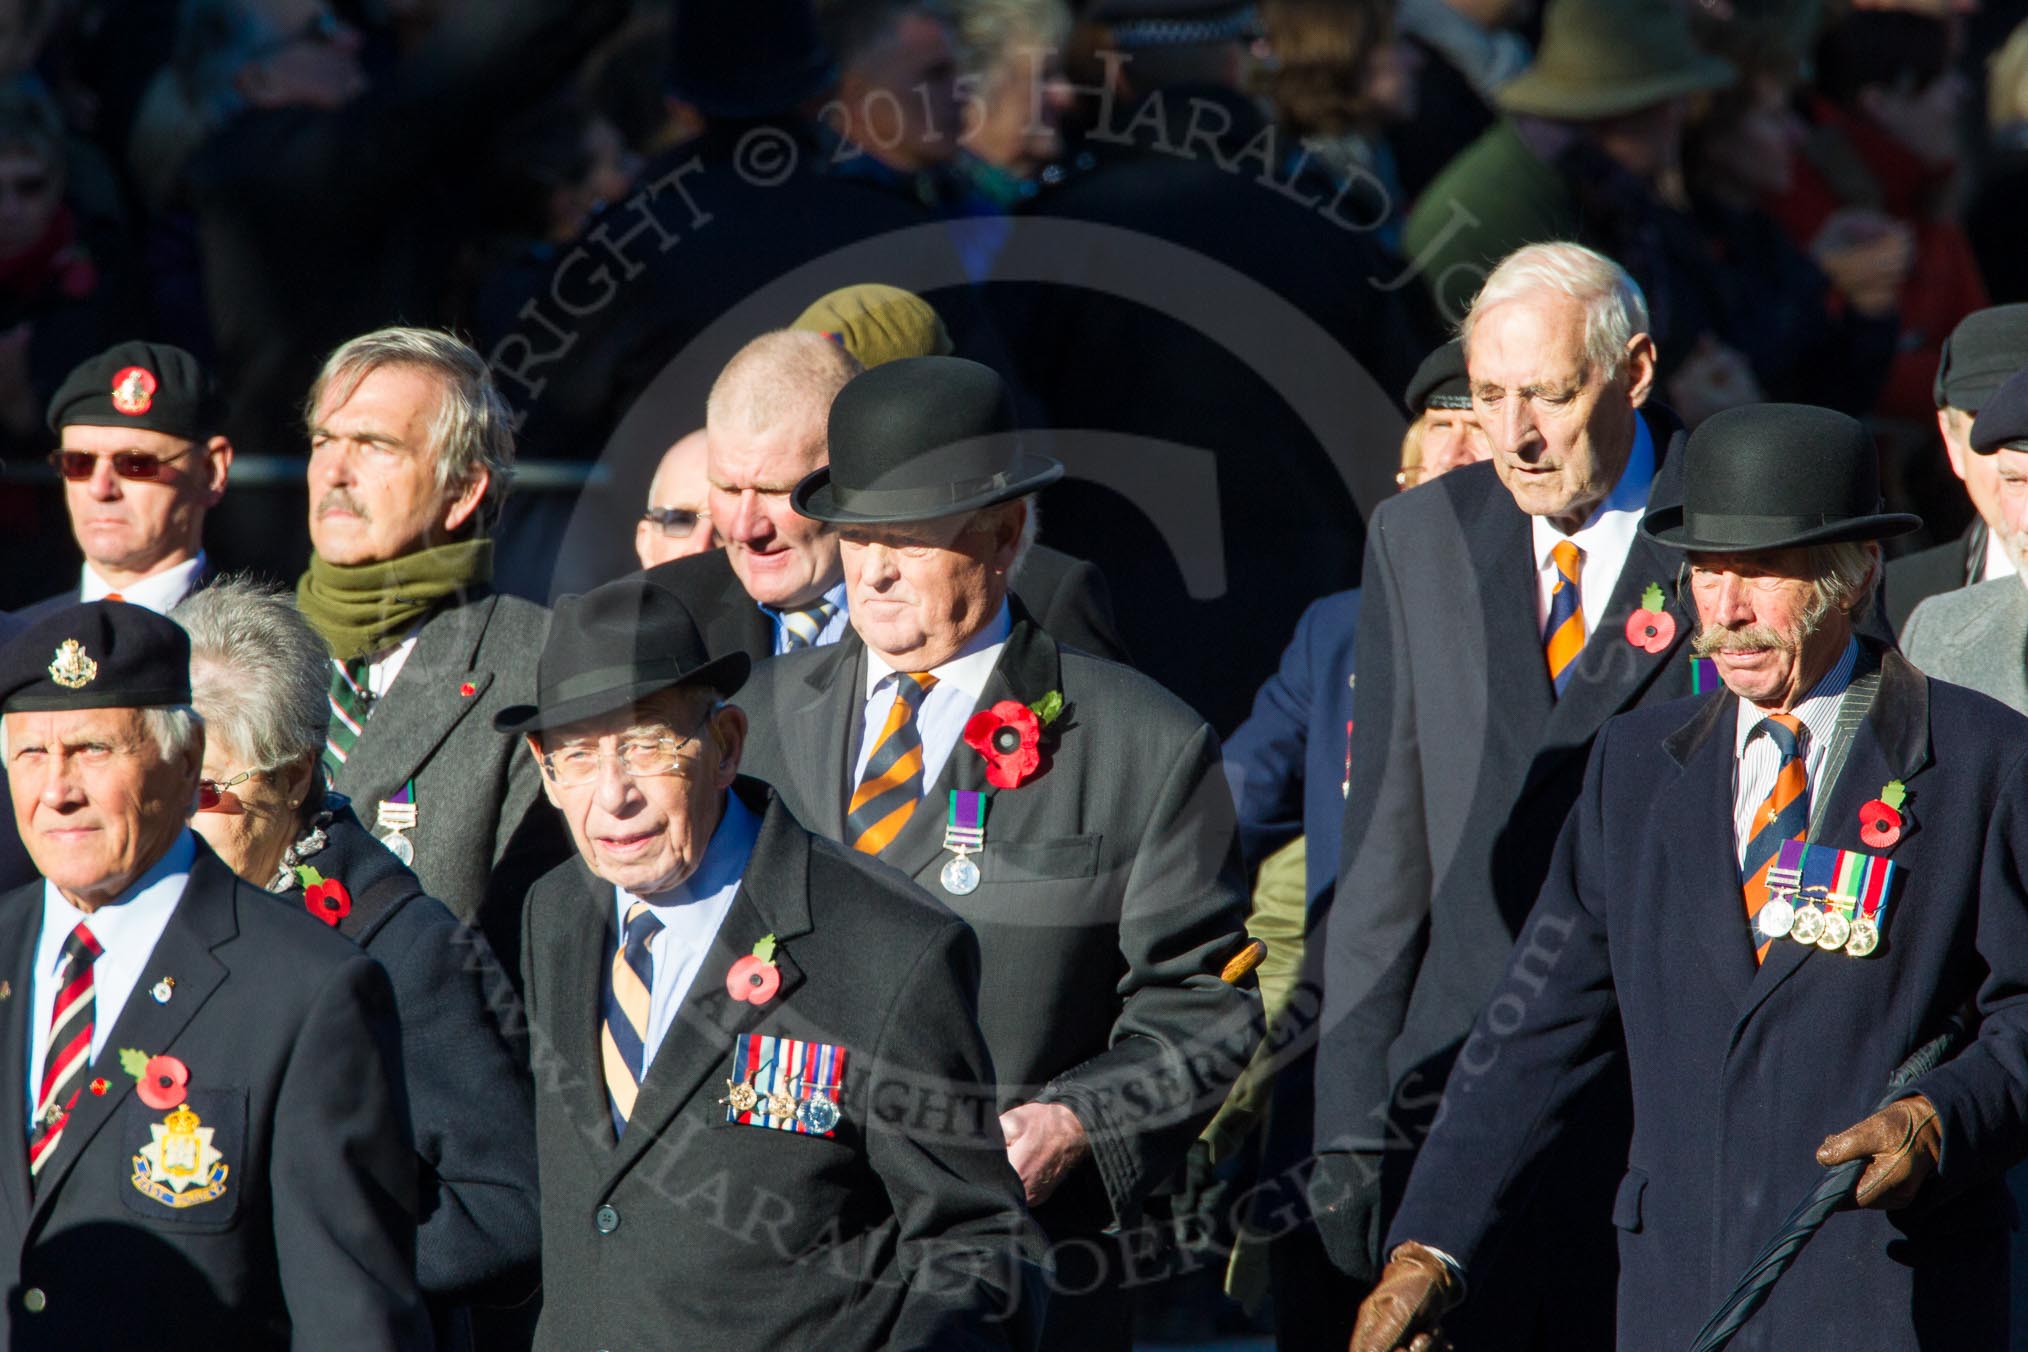 Remembrance Sunday Cenotaph March Past 2013: A32 - Royal East Kent Regiment (The Buffs) Past & Present Association..
Press stand opposite the Foreign Office building, Whitehall, London SW1,
London,
Greater London,
United Kingdom,
on 10 November 2013 at 11:58, image #1284